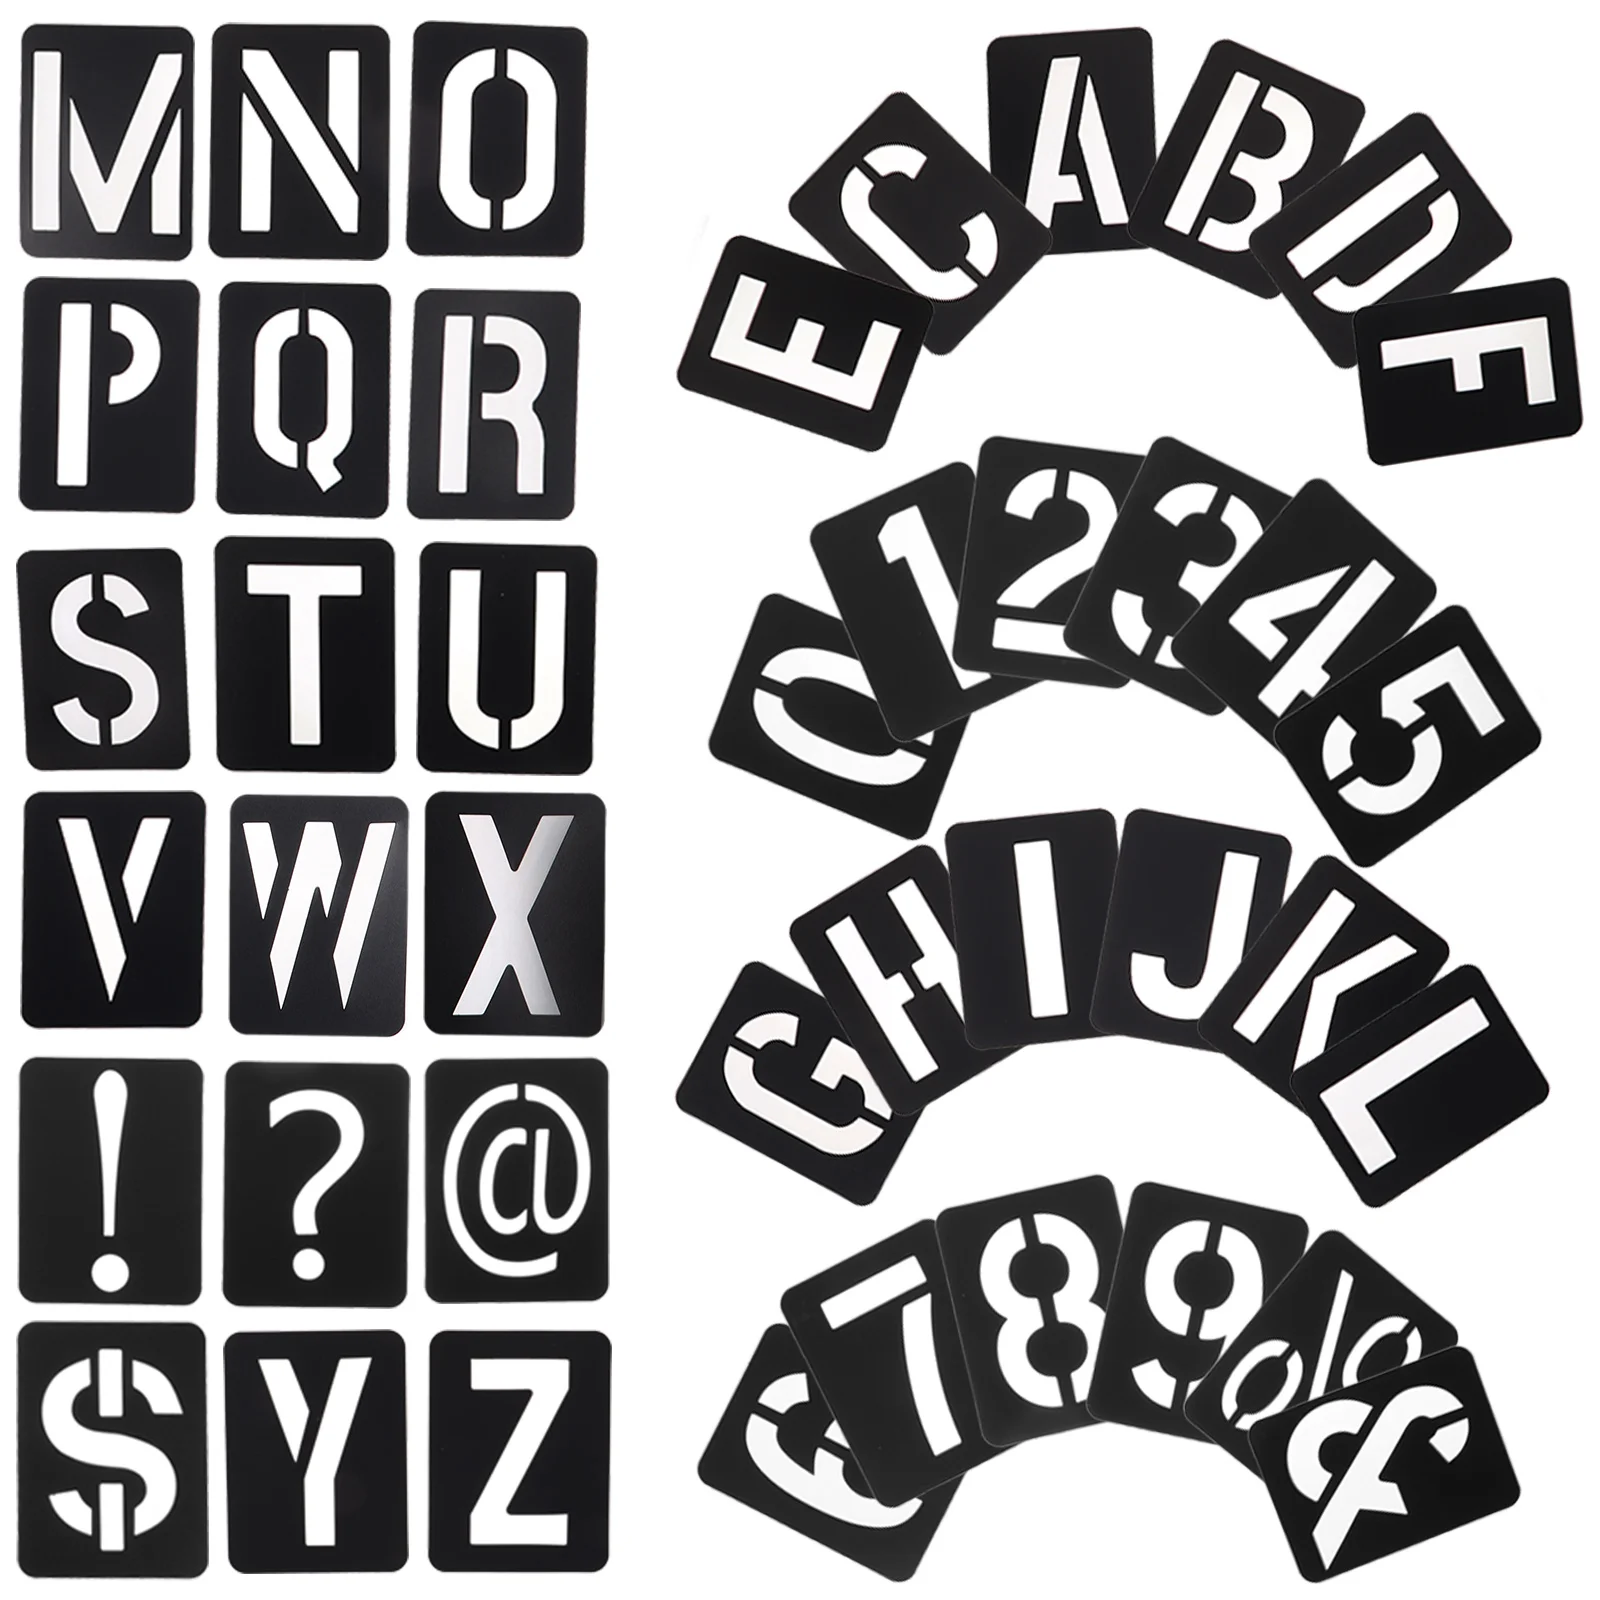 

1 Set of Stencils Letter Stencils Stencils Plastic Stencil for Painting DIY Craft with Numbers and Signs